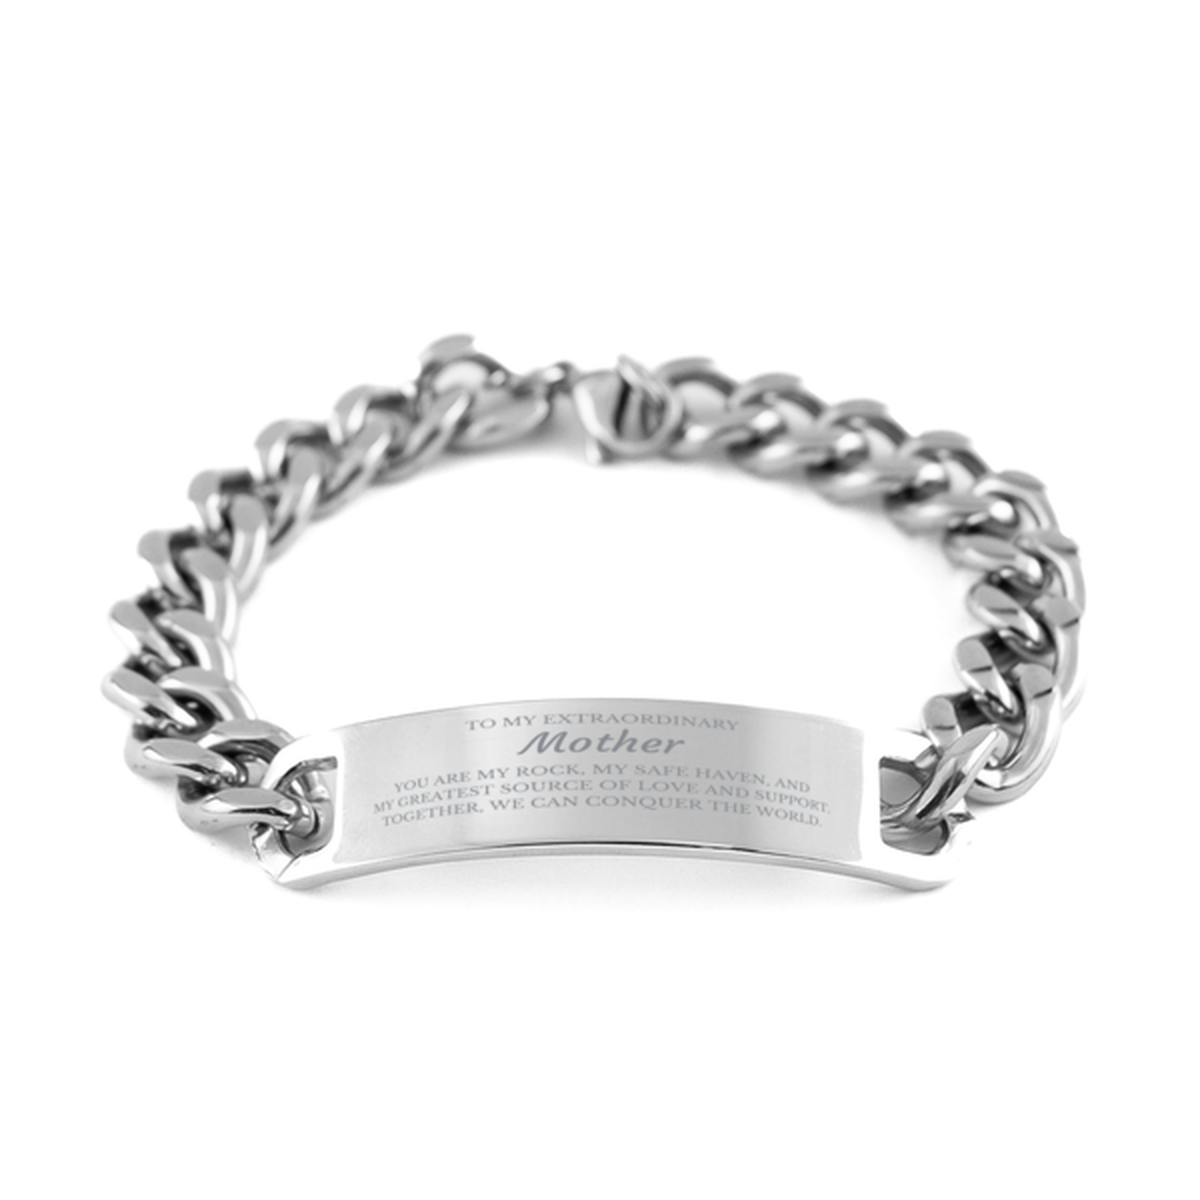 To My Extraordinary Mother Gifts, Together, we can conquer the world, Birthday Cuban Chain Stainless Steel Bracelet For Mother, Christmas Gifts For Mother